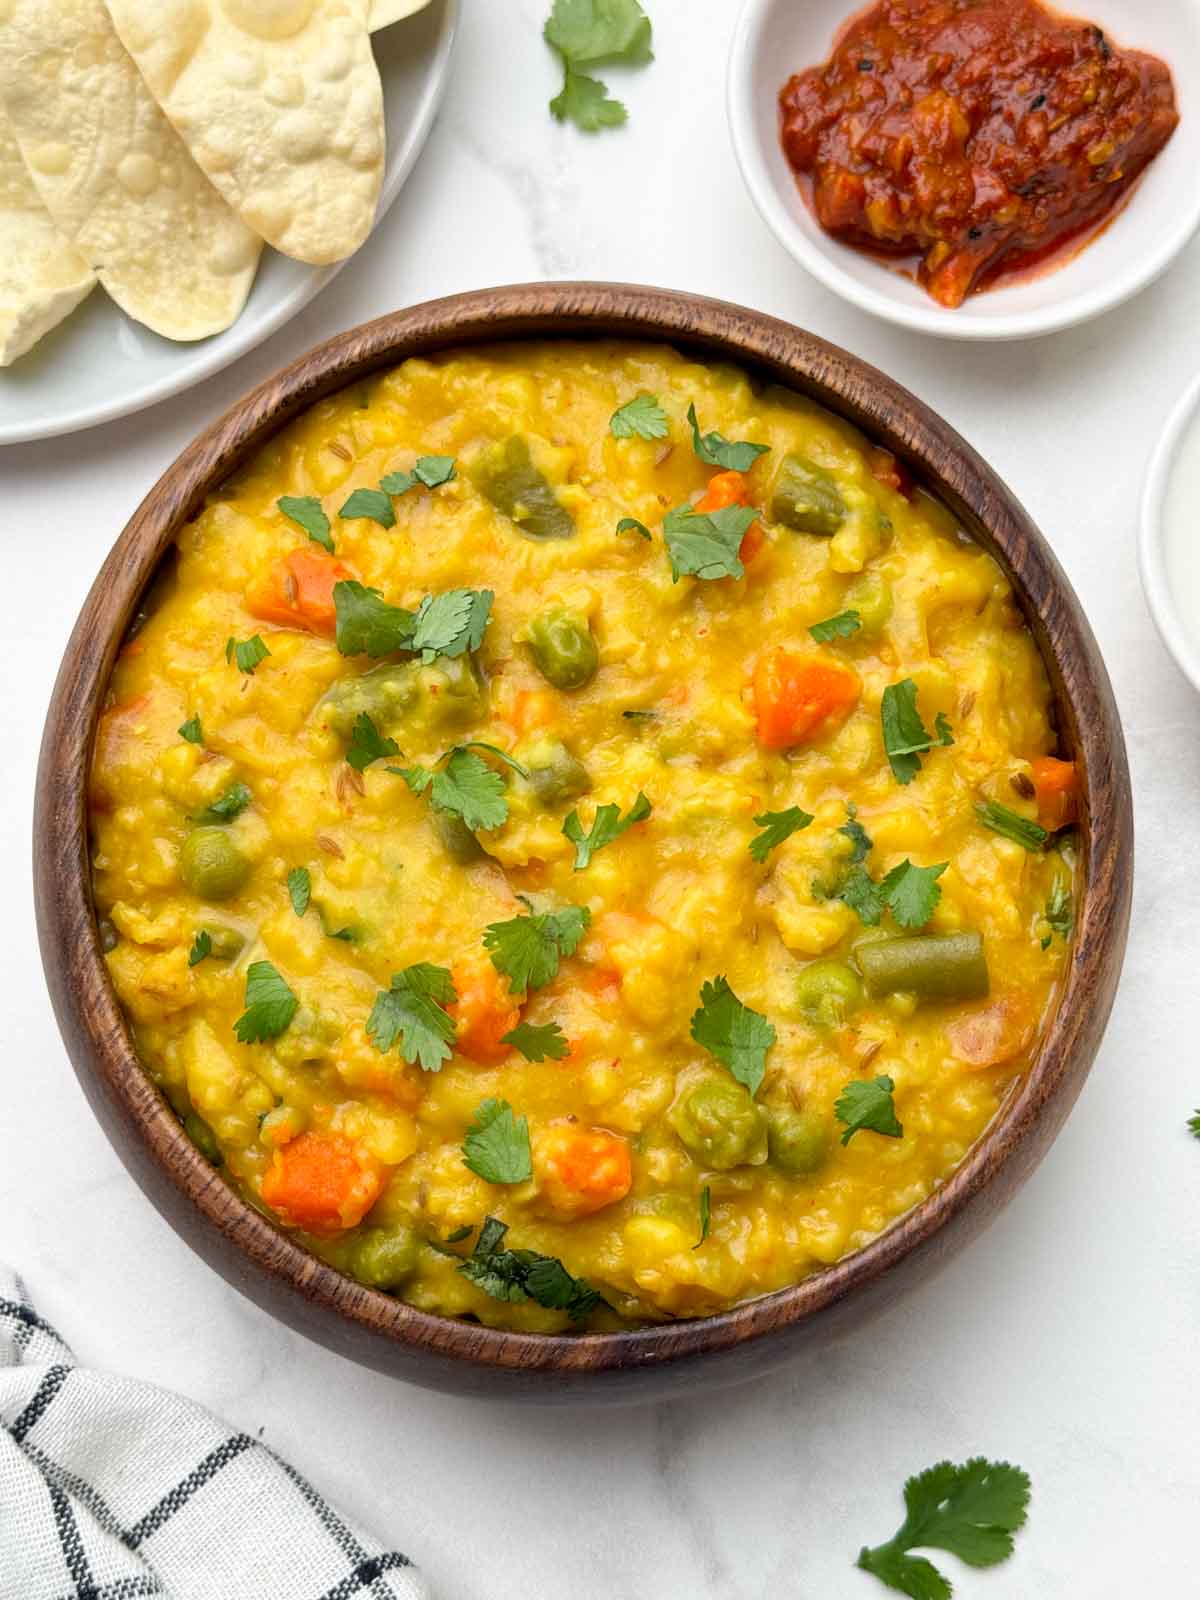 vegetable oats khichdi served in a bowl with papd and pickle on the side